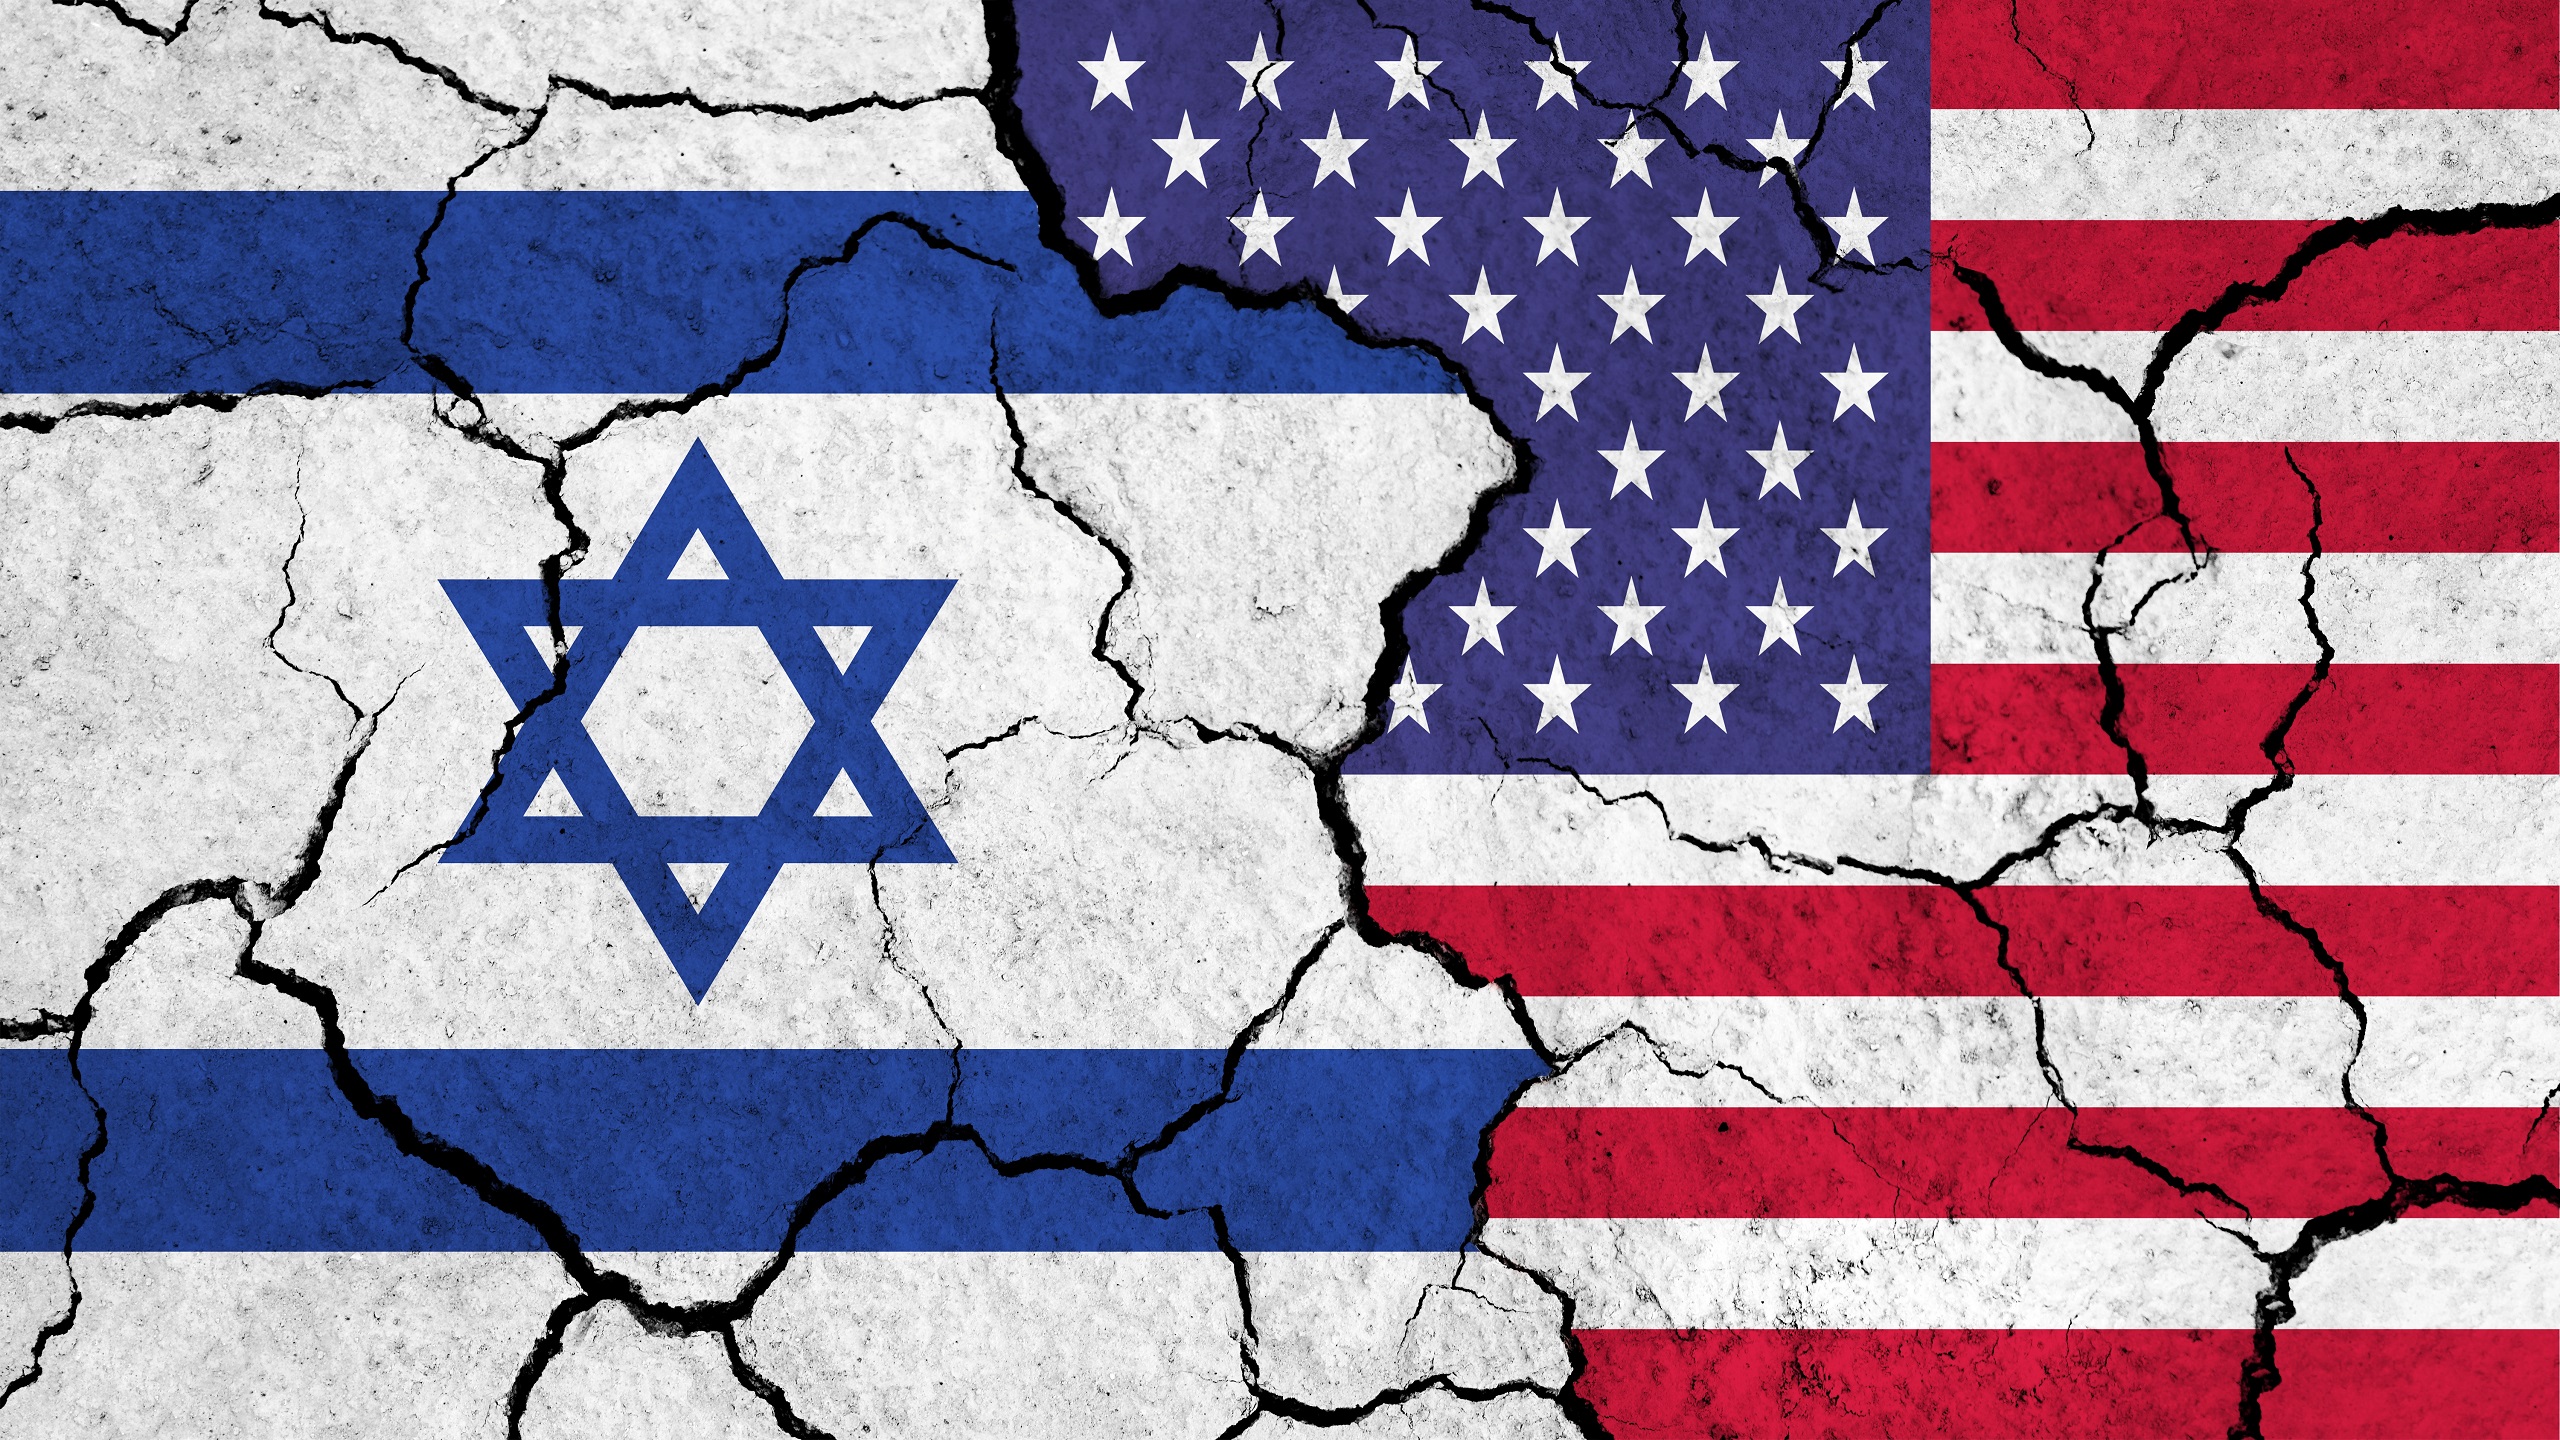 flags-israel-usa-cracked-surface-politics-relationship-concept.jpg